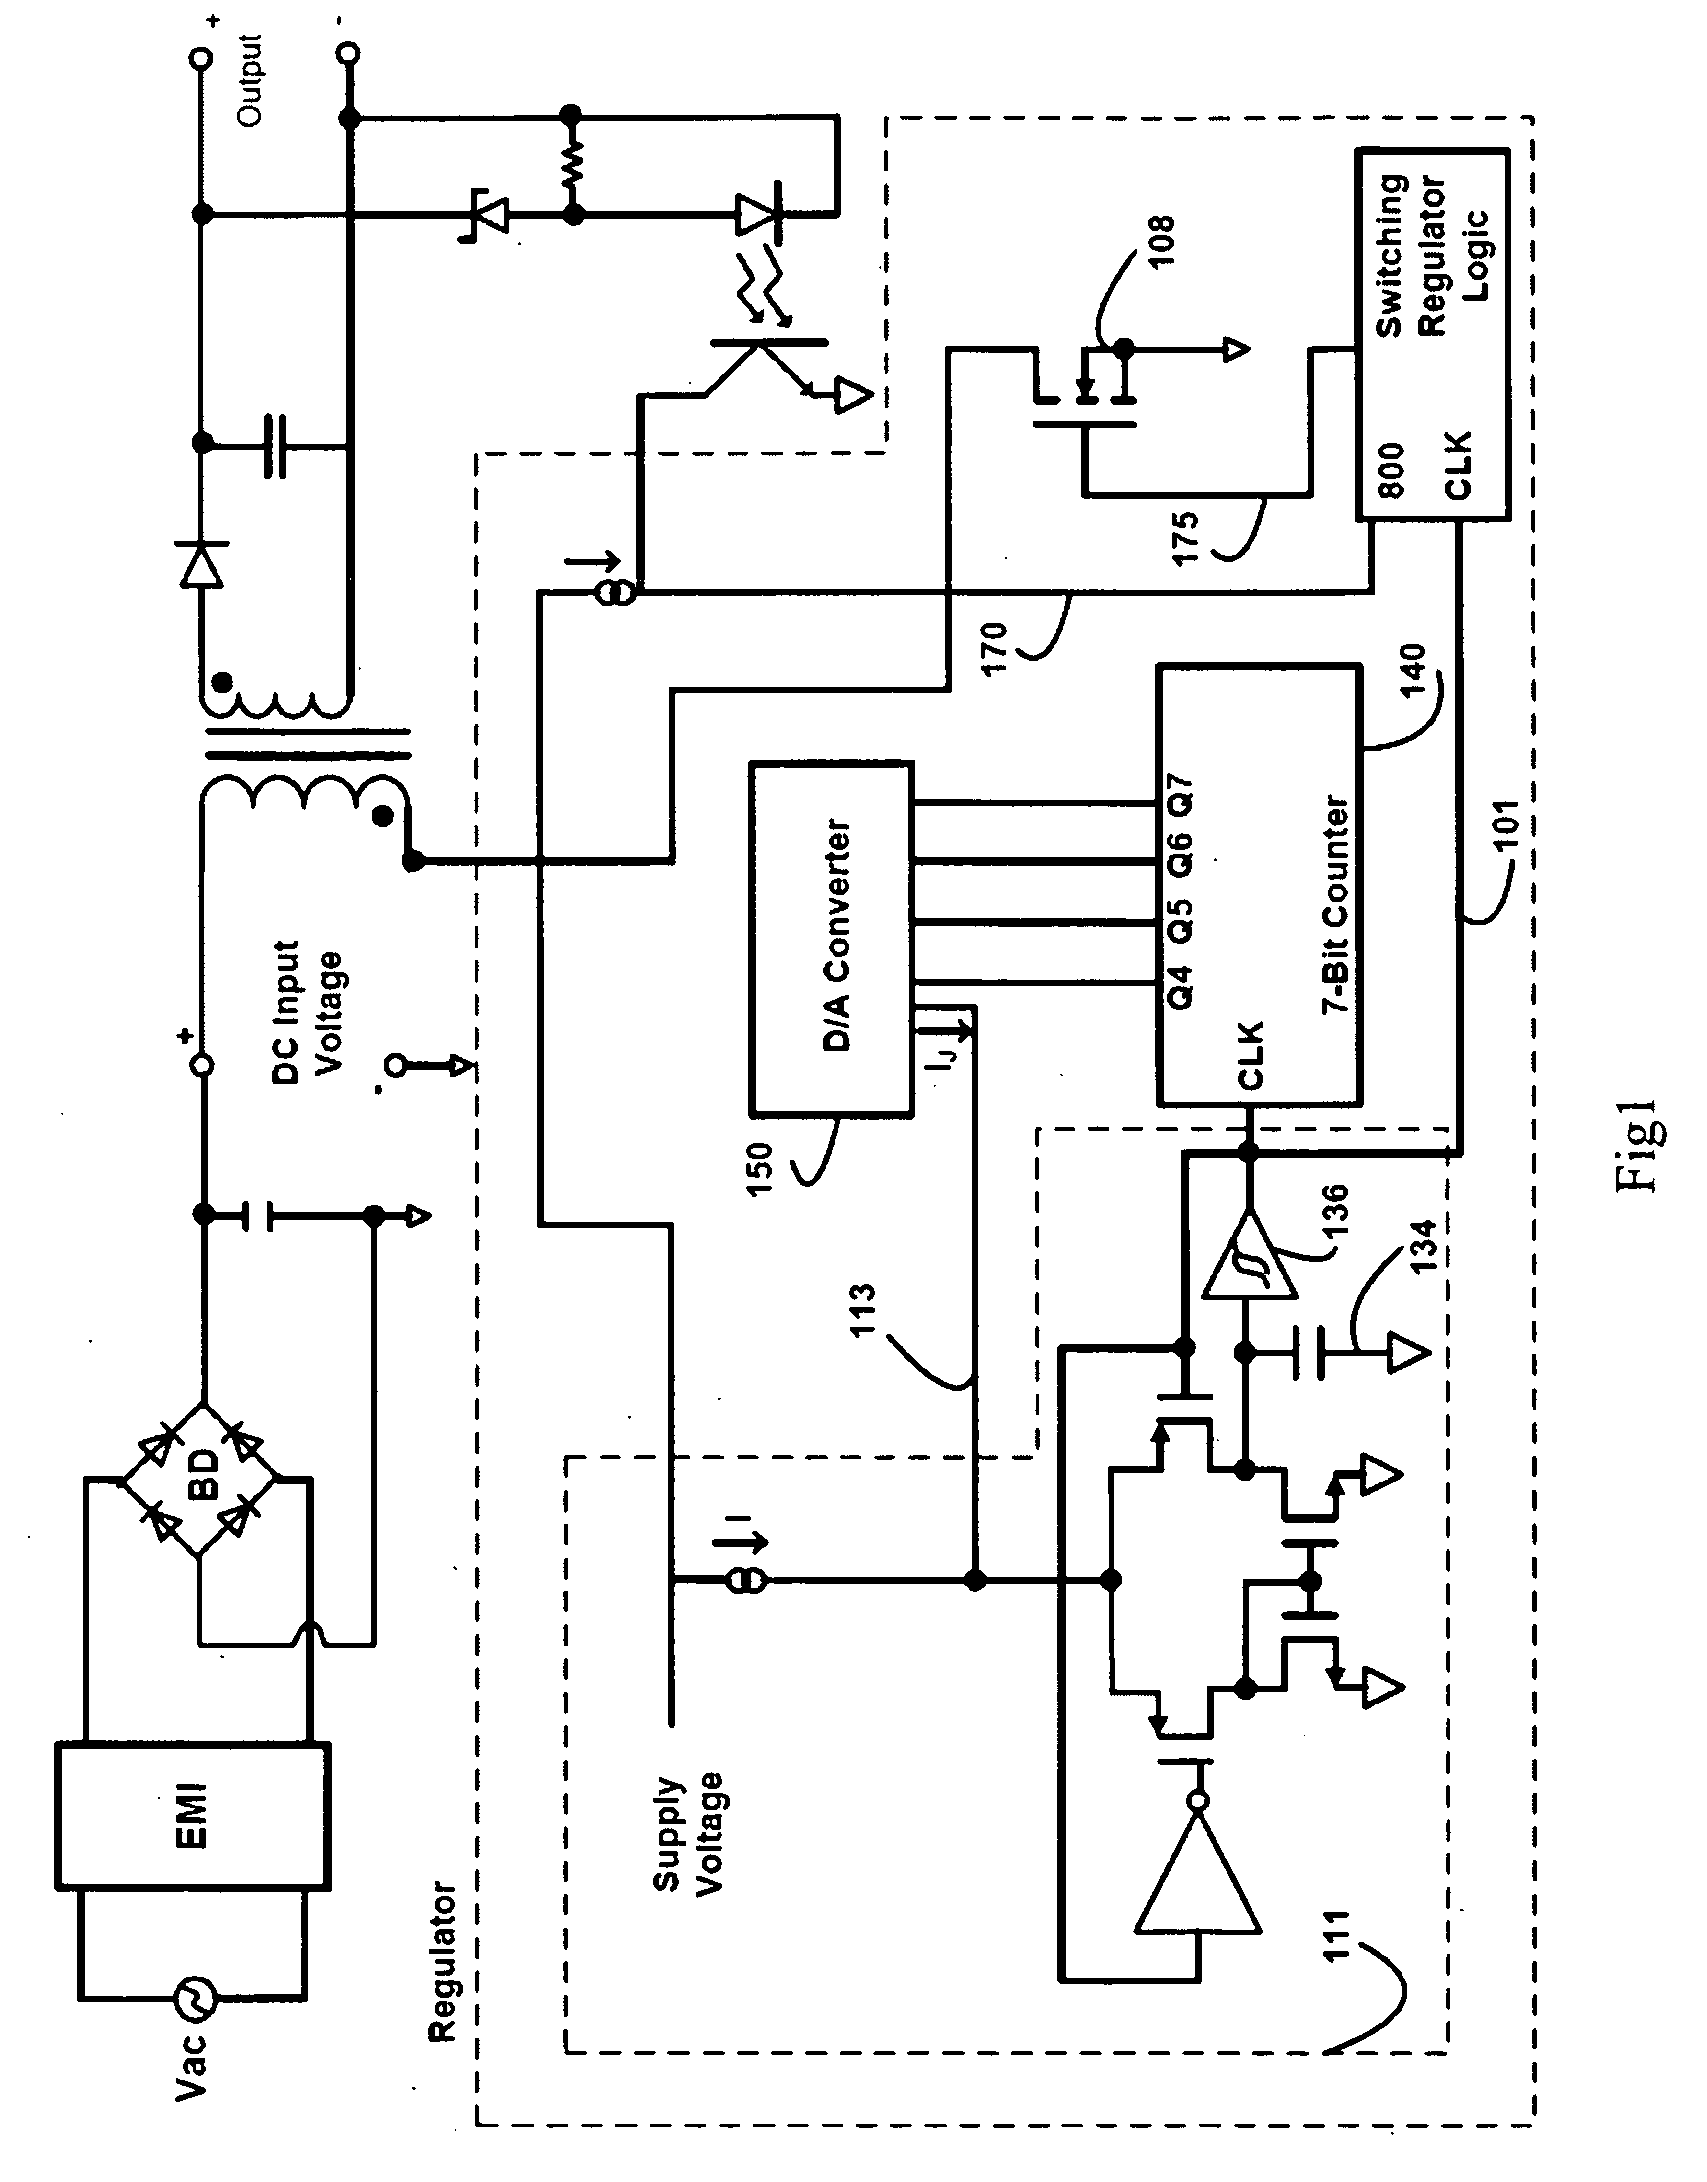 Load adaptive EMI reduction scheme for switching mode power supply